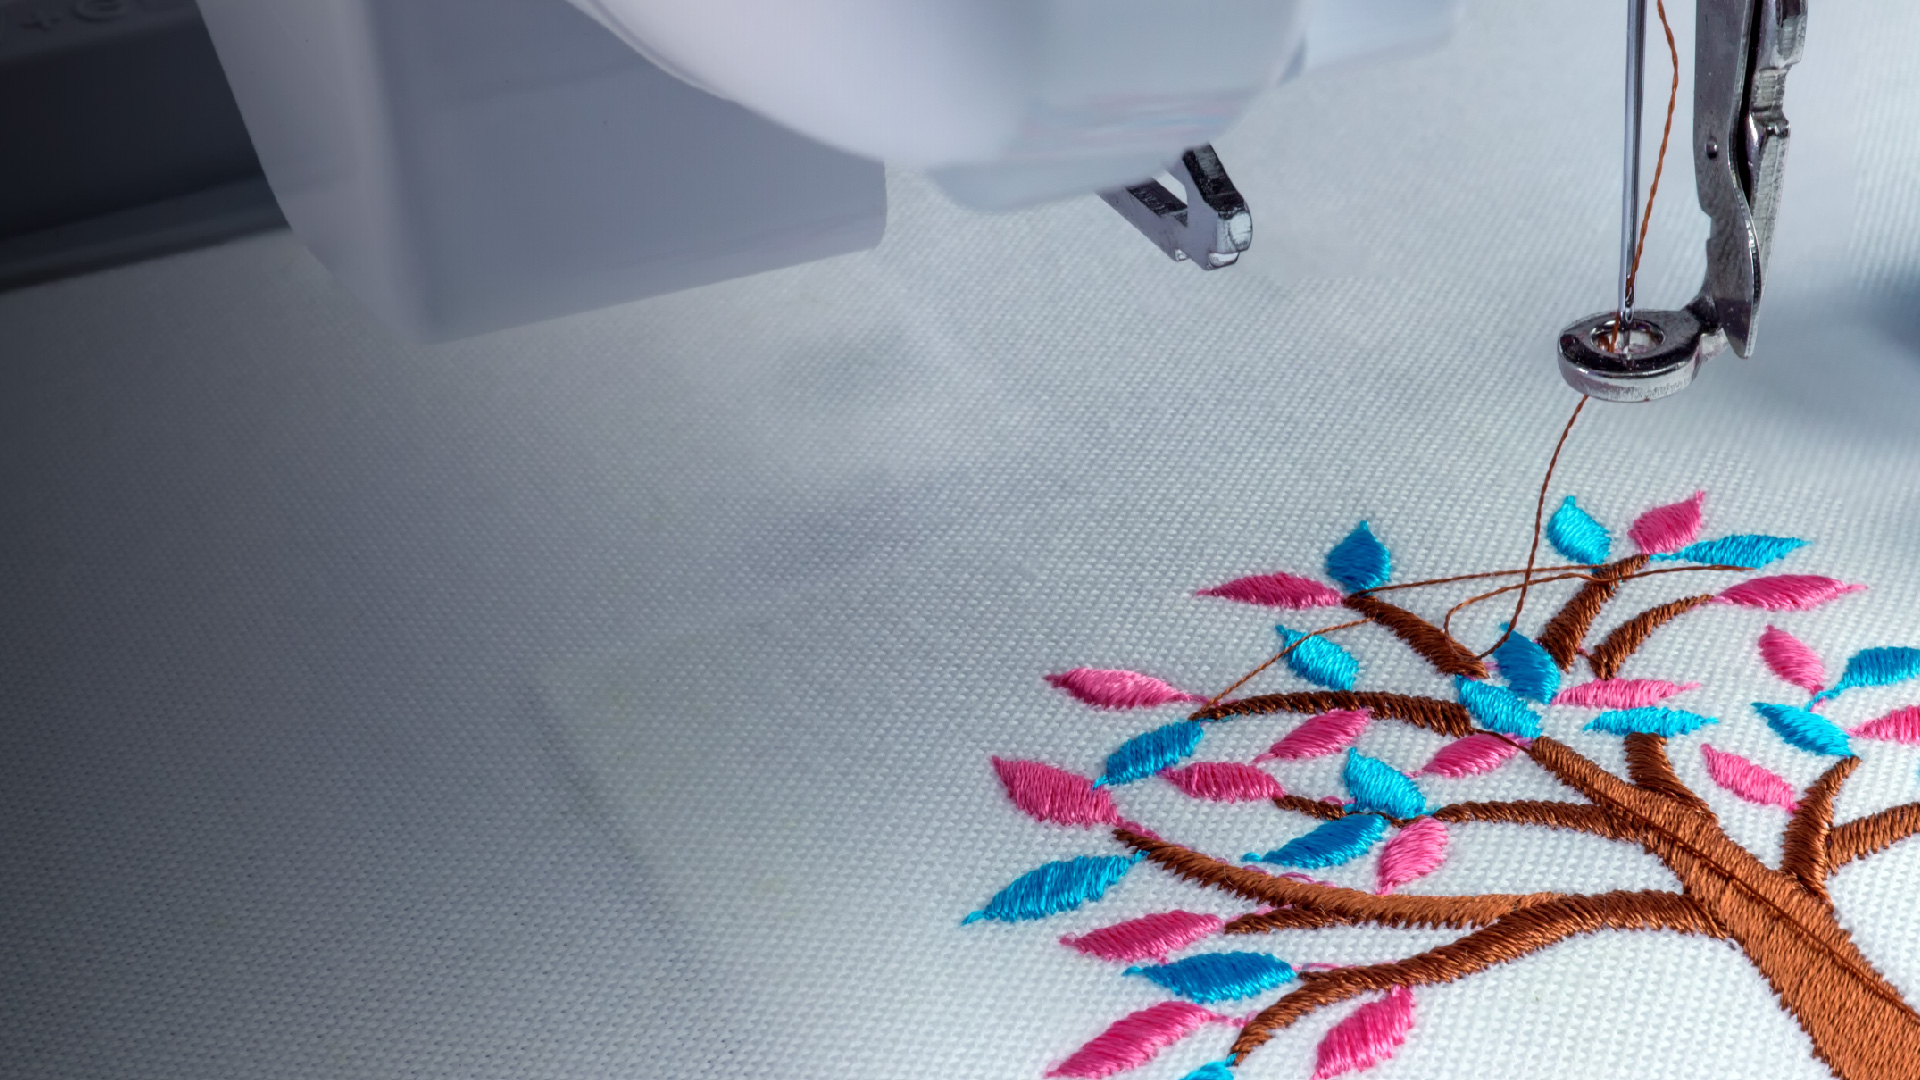 All About Embroidery Backing Fabric: Which one to Choose?